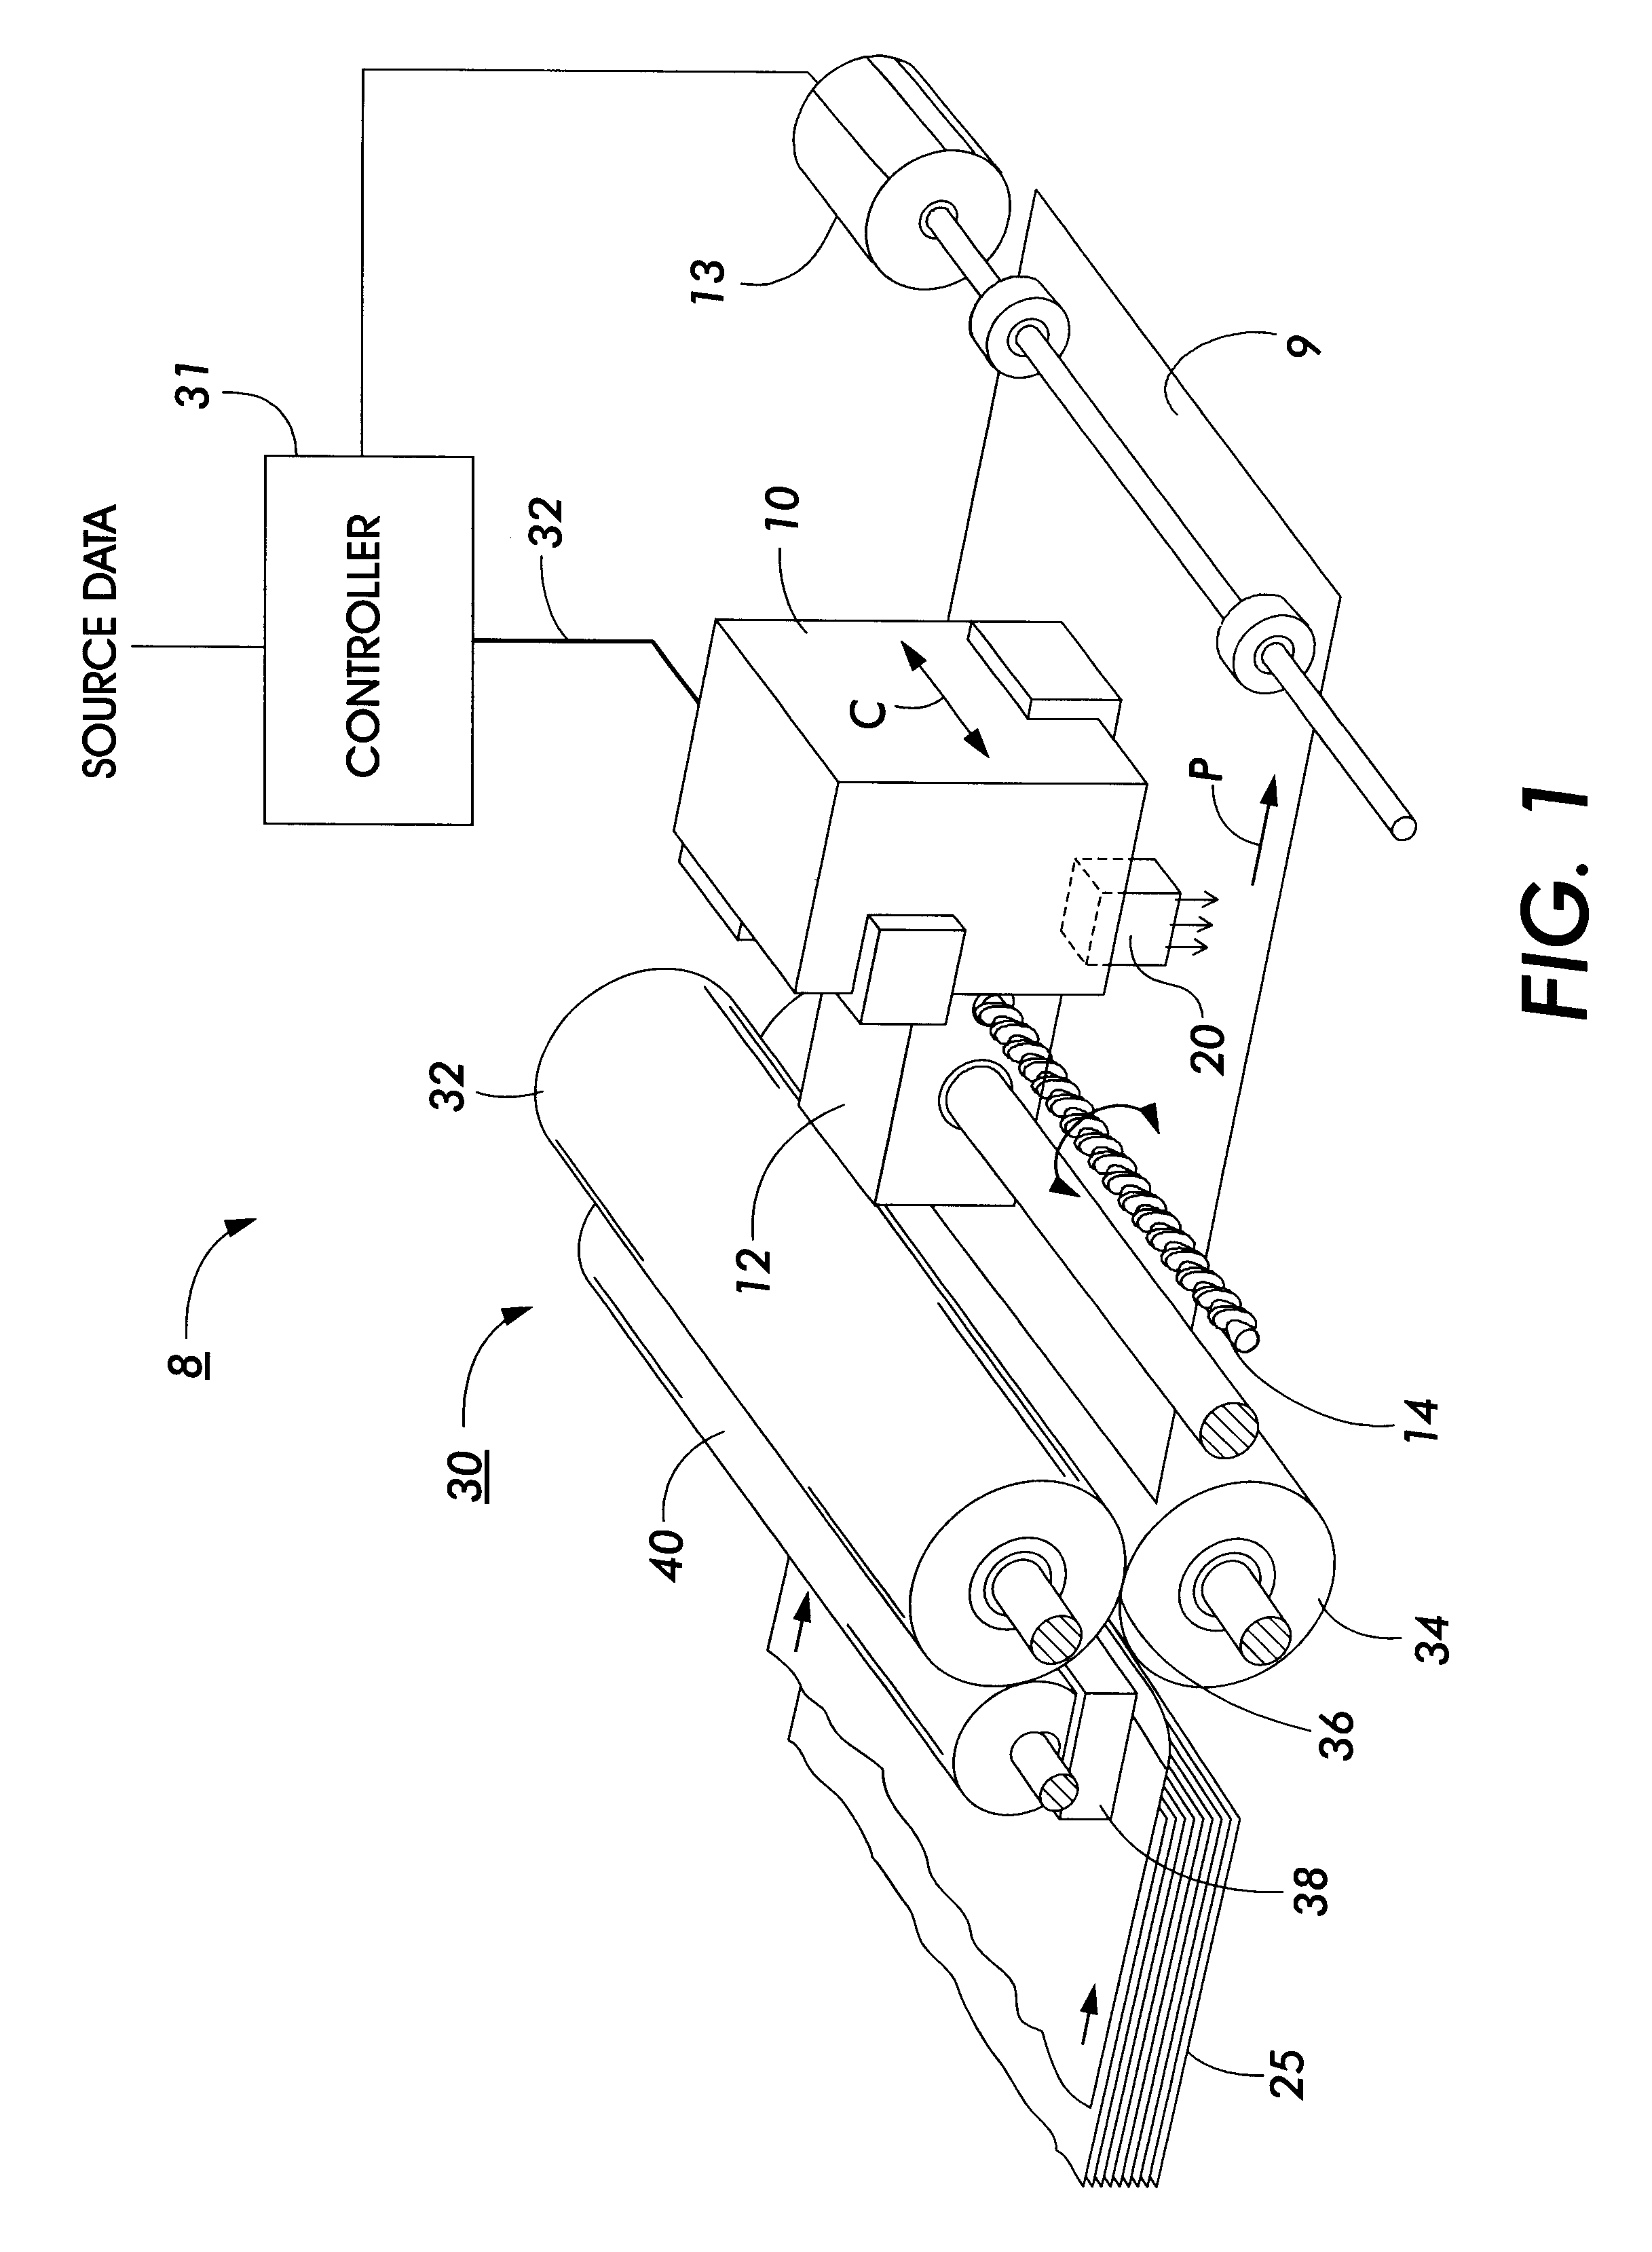 Method and apparatus for treating recording media to enhance print quality in an ink jet printer